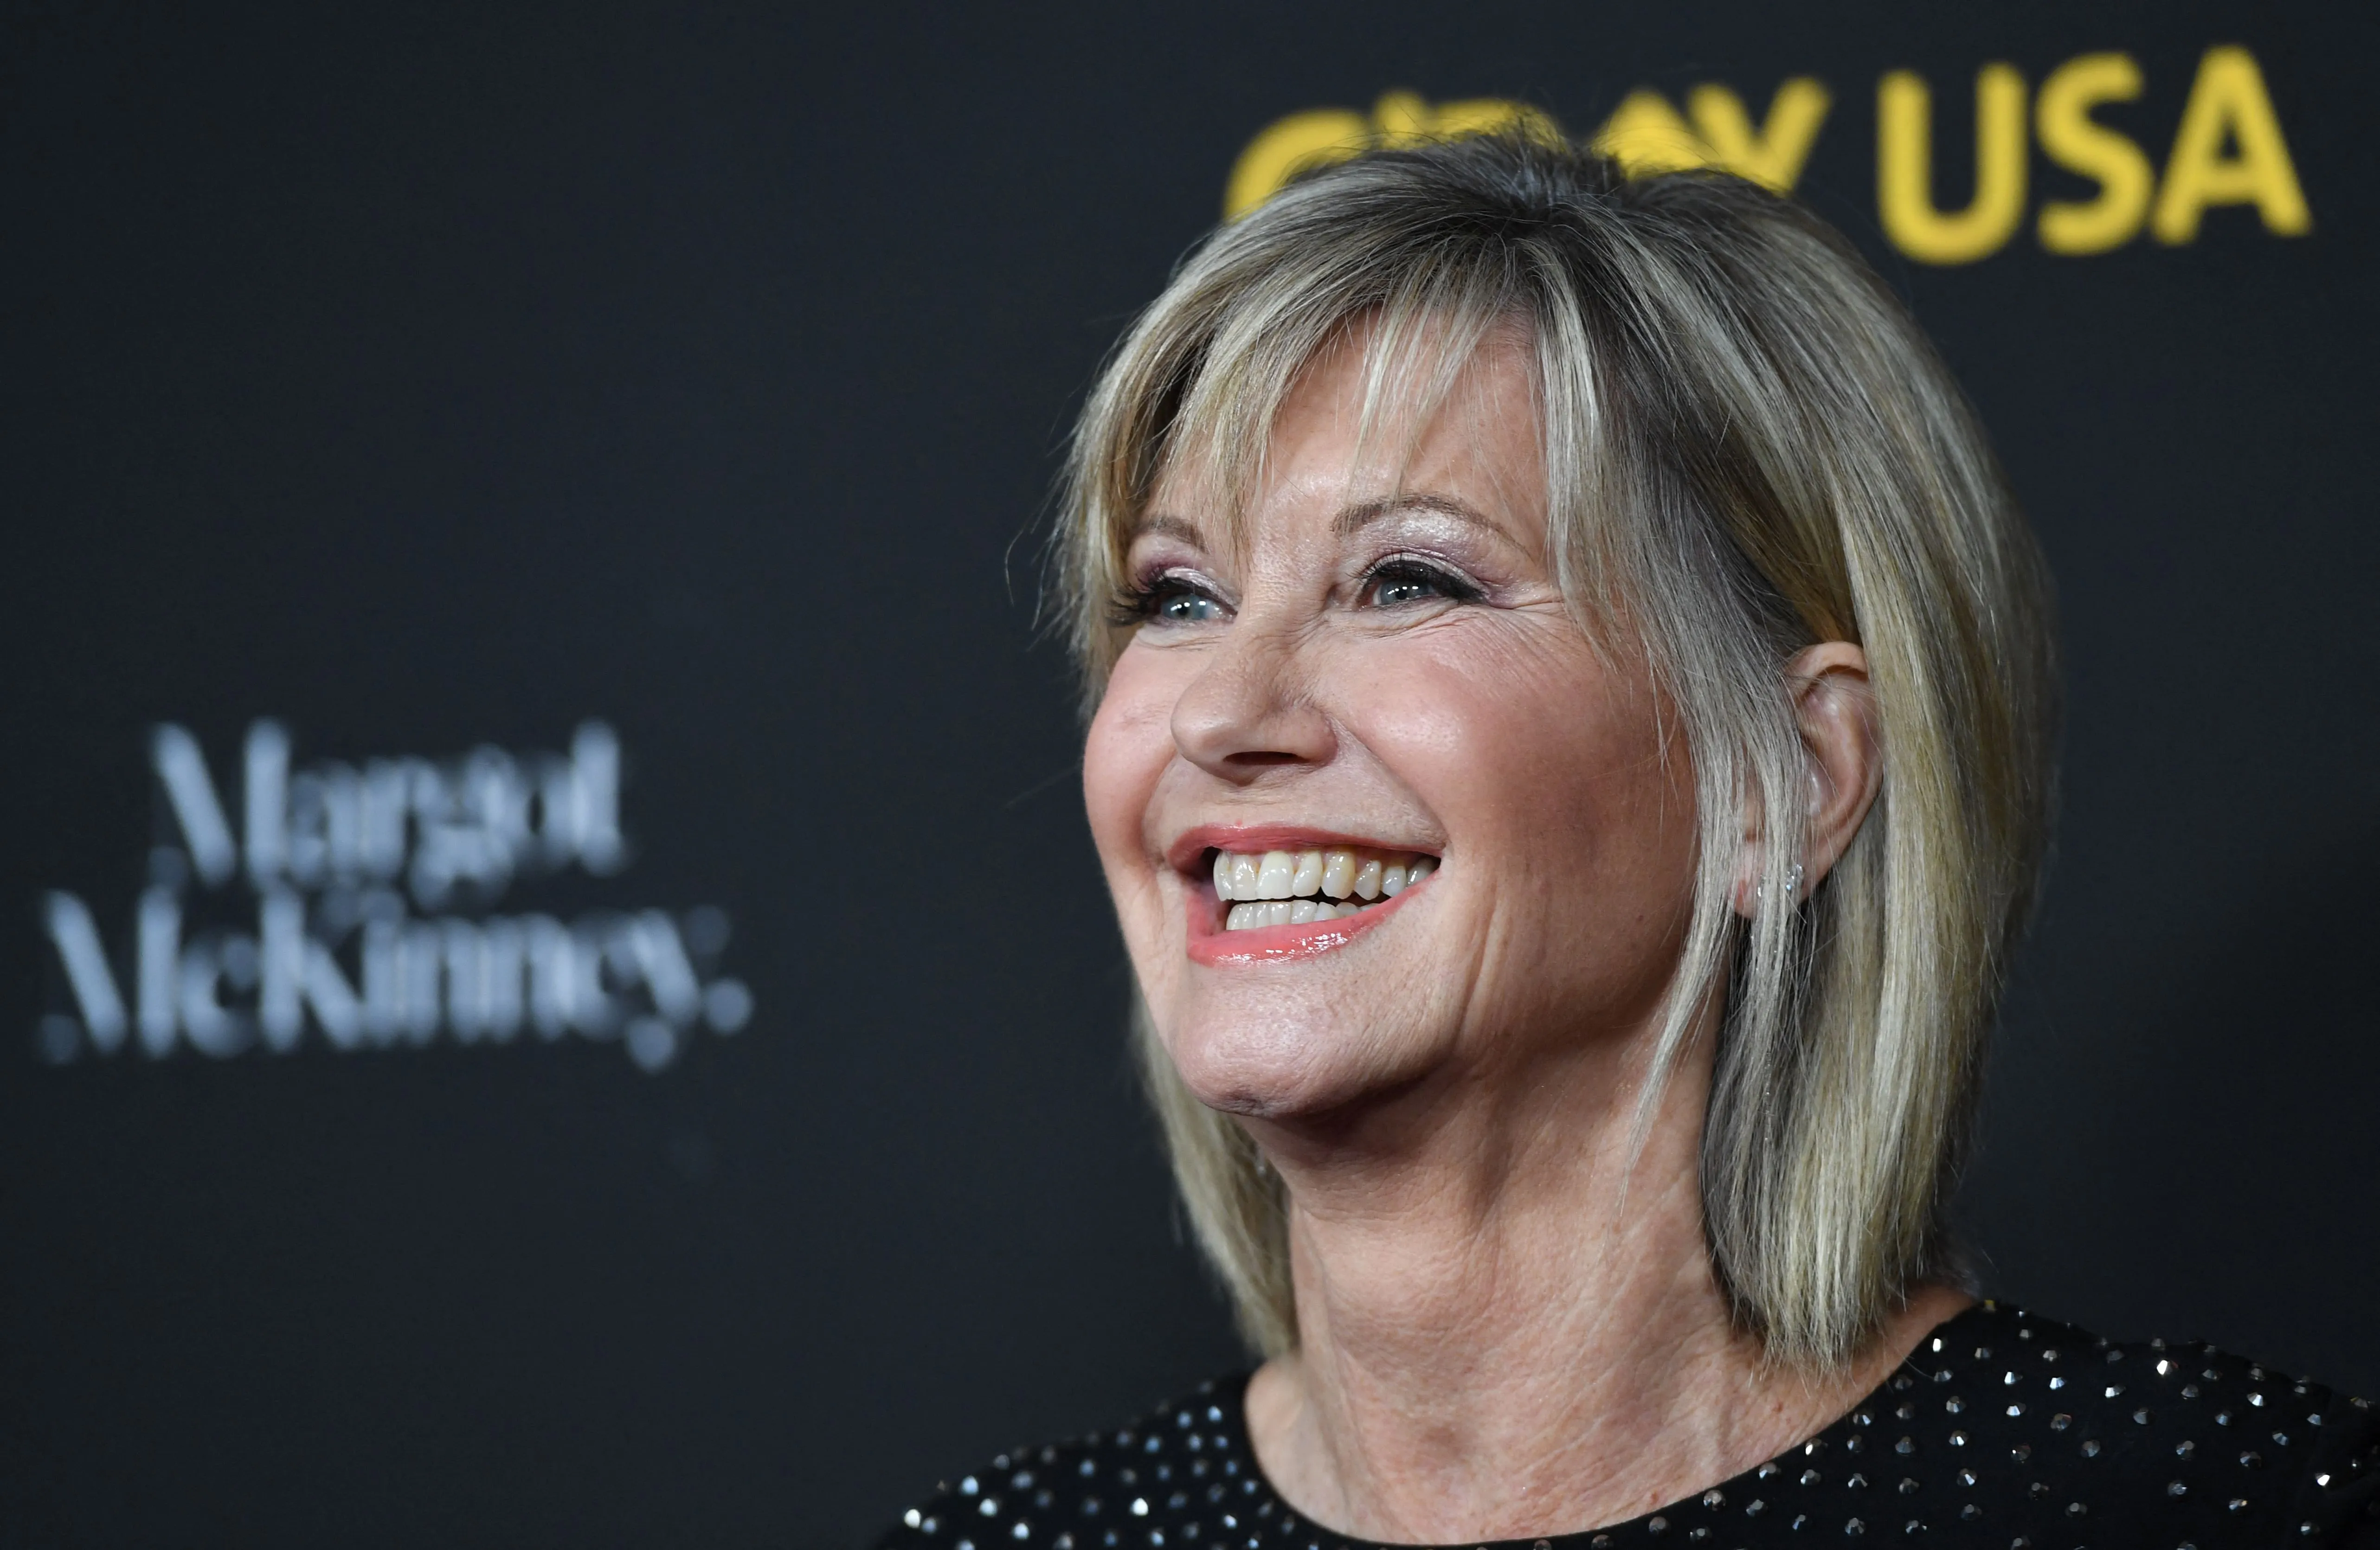 Olivia Newton-John arrives for G'Day USA Los Angeles Black Tie Gala Jan. 27, 2018, in Los Angeles. The singer and actress died Monday, Aug. 8, 2022, at age 73 after a decades-long struggle with breast cancer.?w=200&h=150